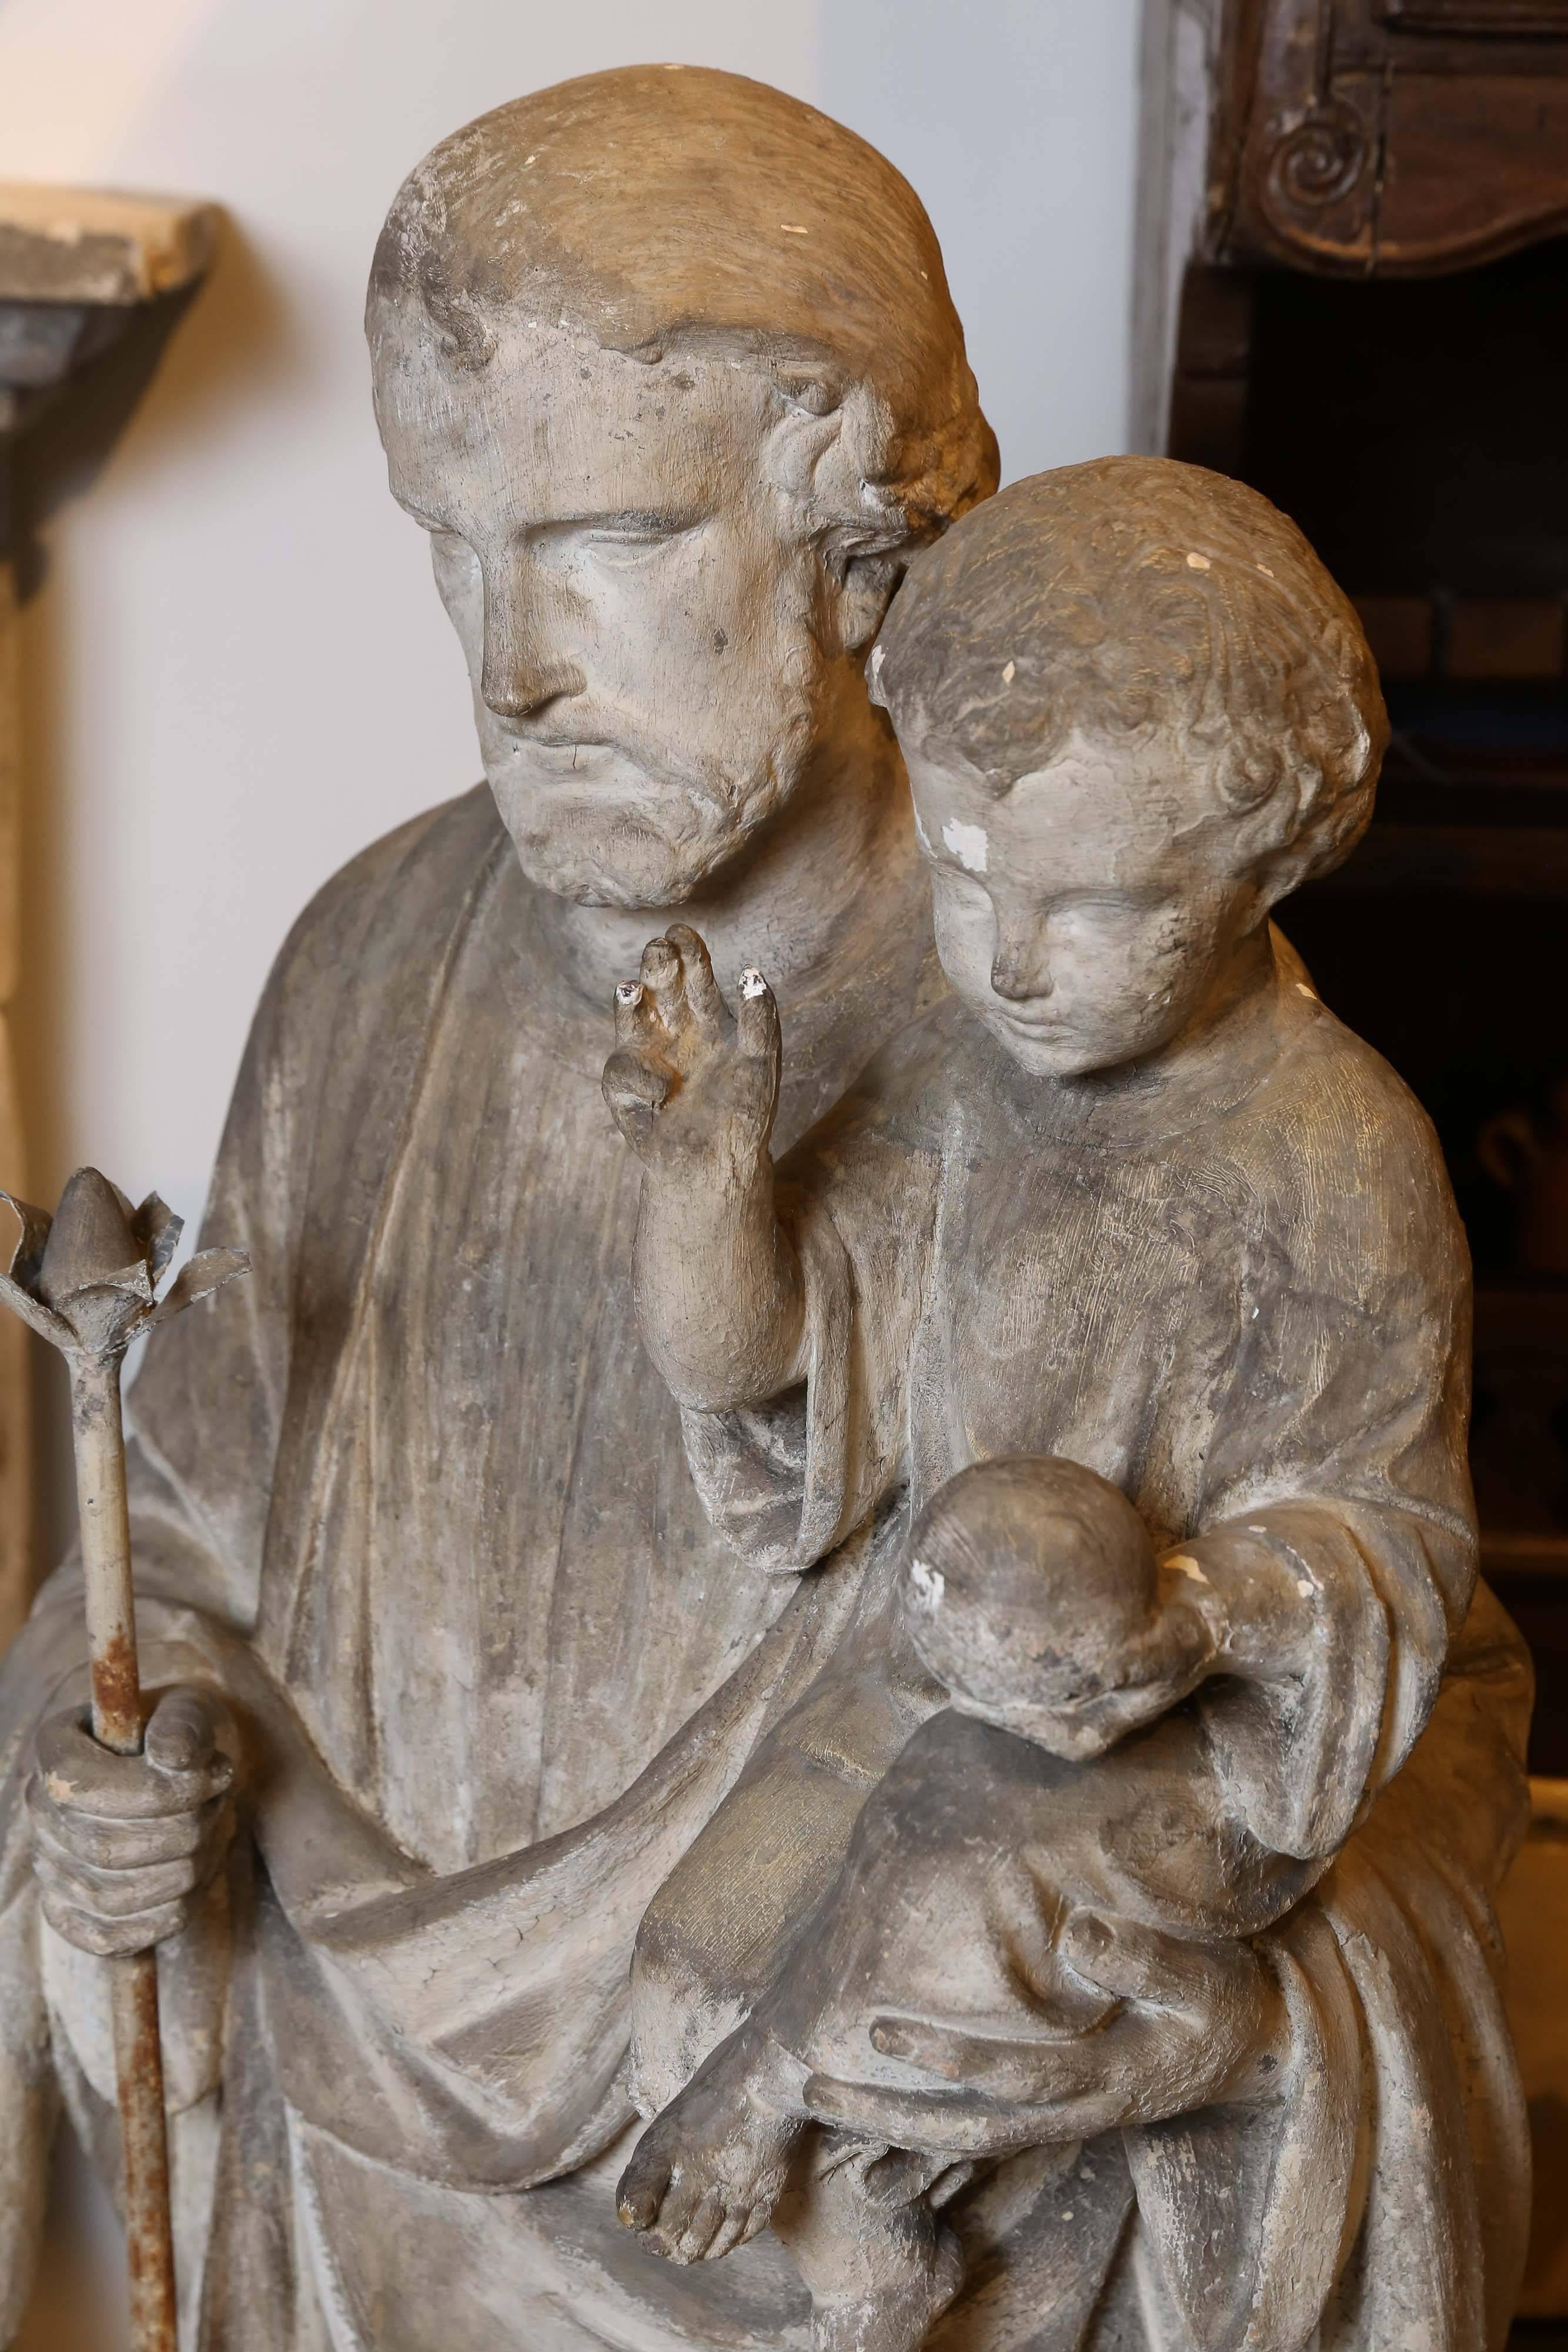 An impressive concrete statue from France of Saint Joseph holding the Baby Jesus. Saint Joseph, the Protector of the Catholic Church, holds an iron staff topped by a Lily in his right hand while holding the Christ Child with his left. The Baby Jesus